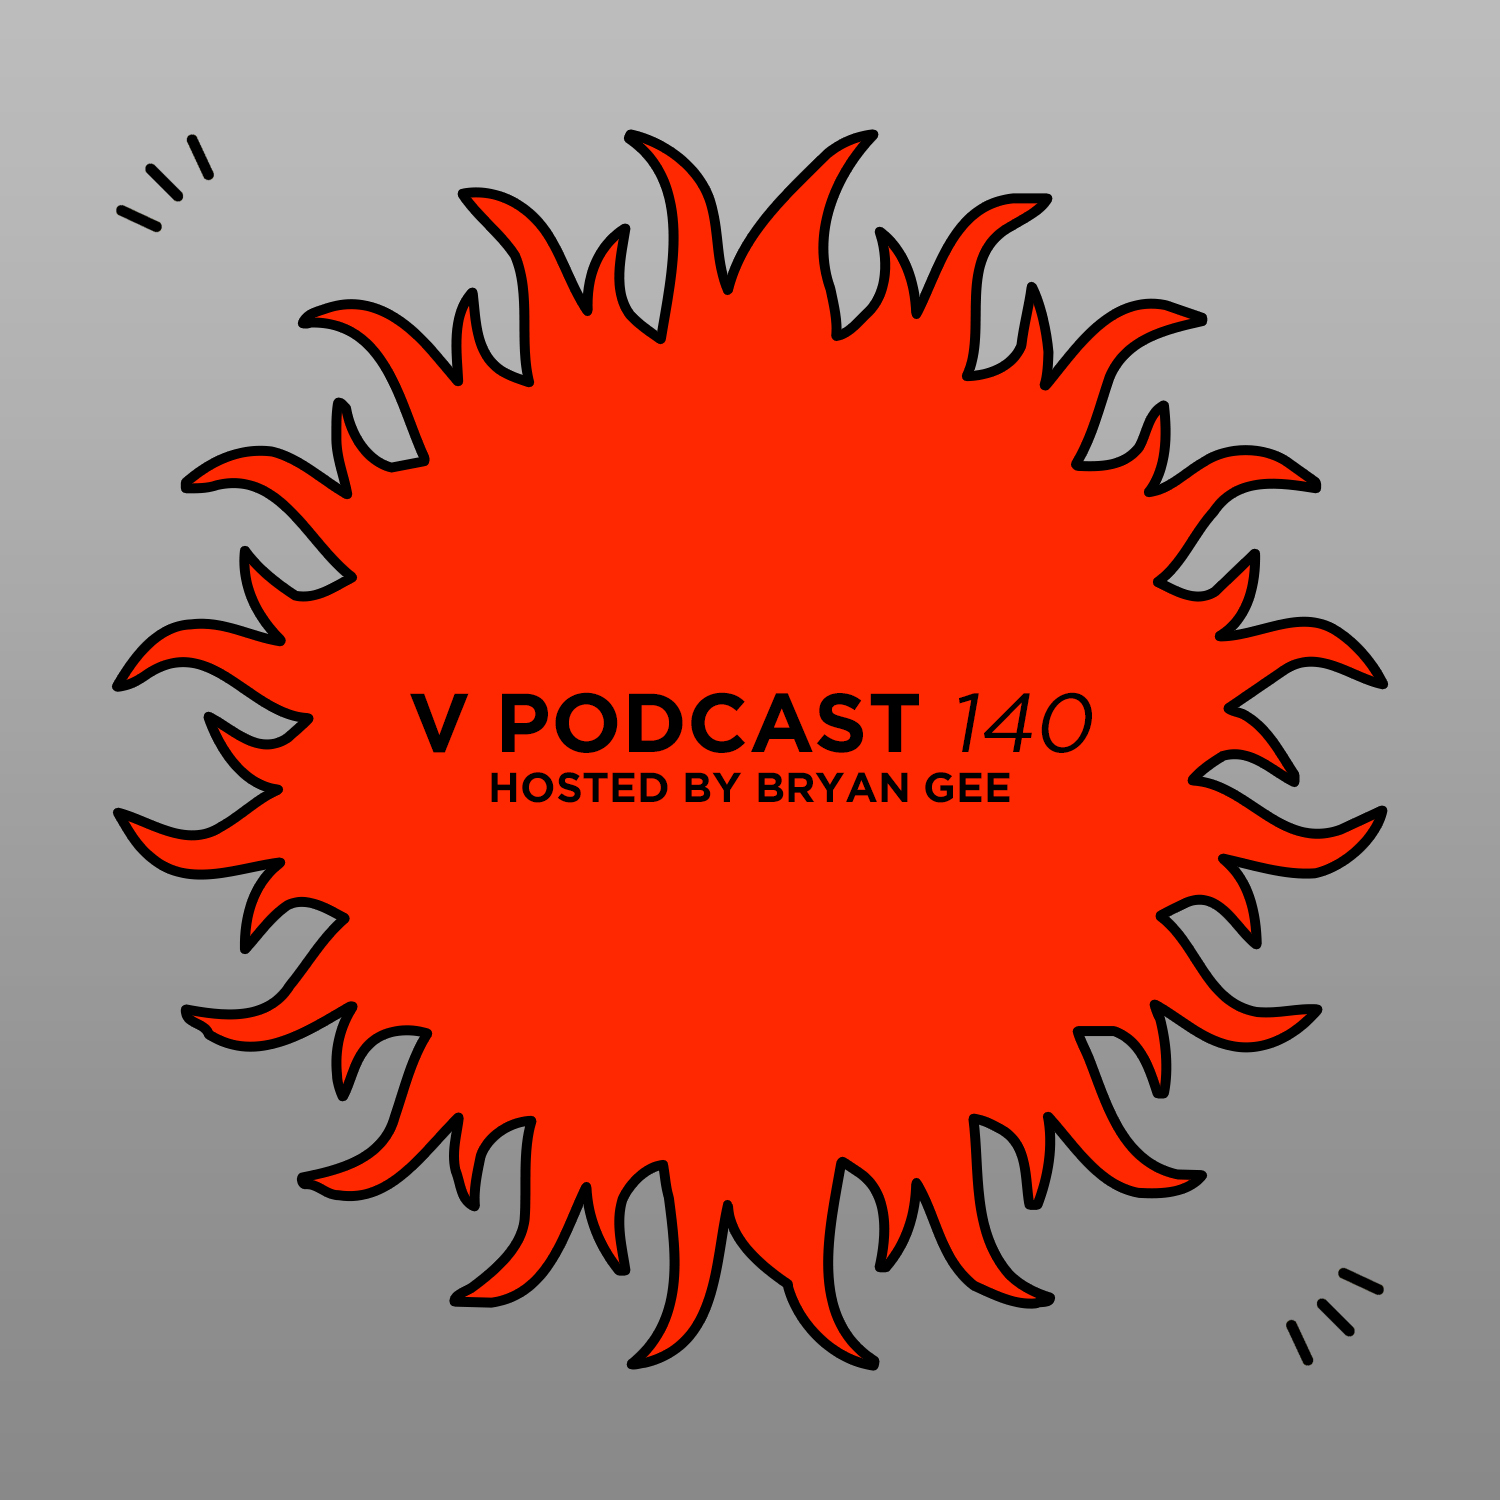 V Podcast 140 - Hosted by Bryan Gee Artwork